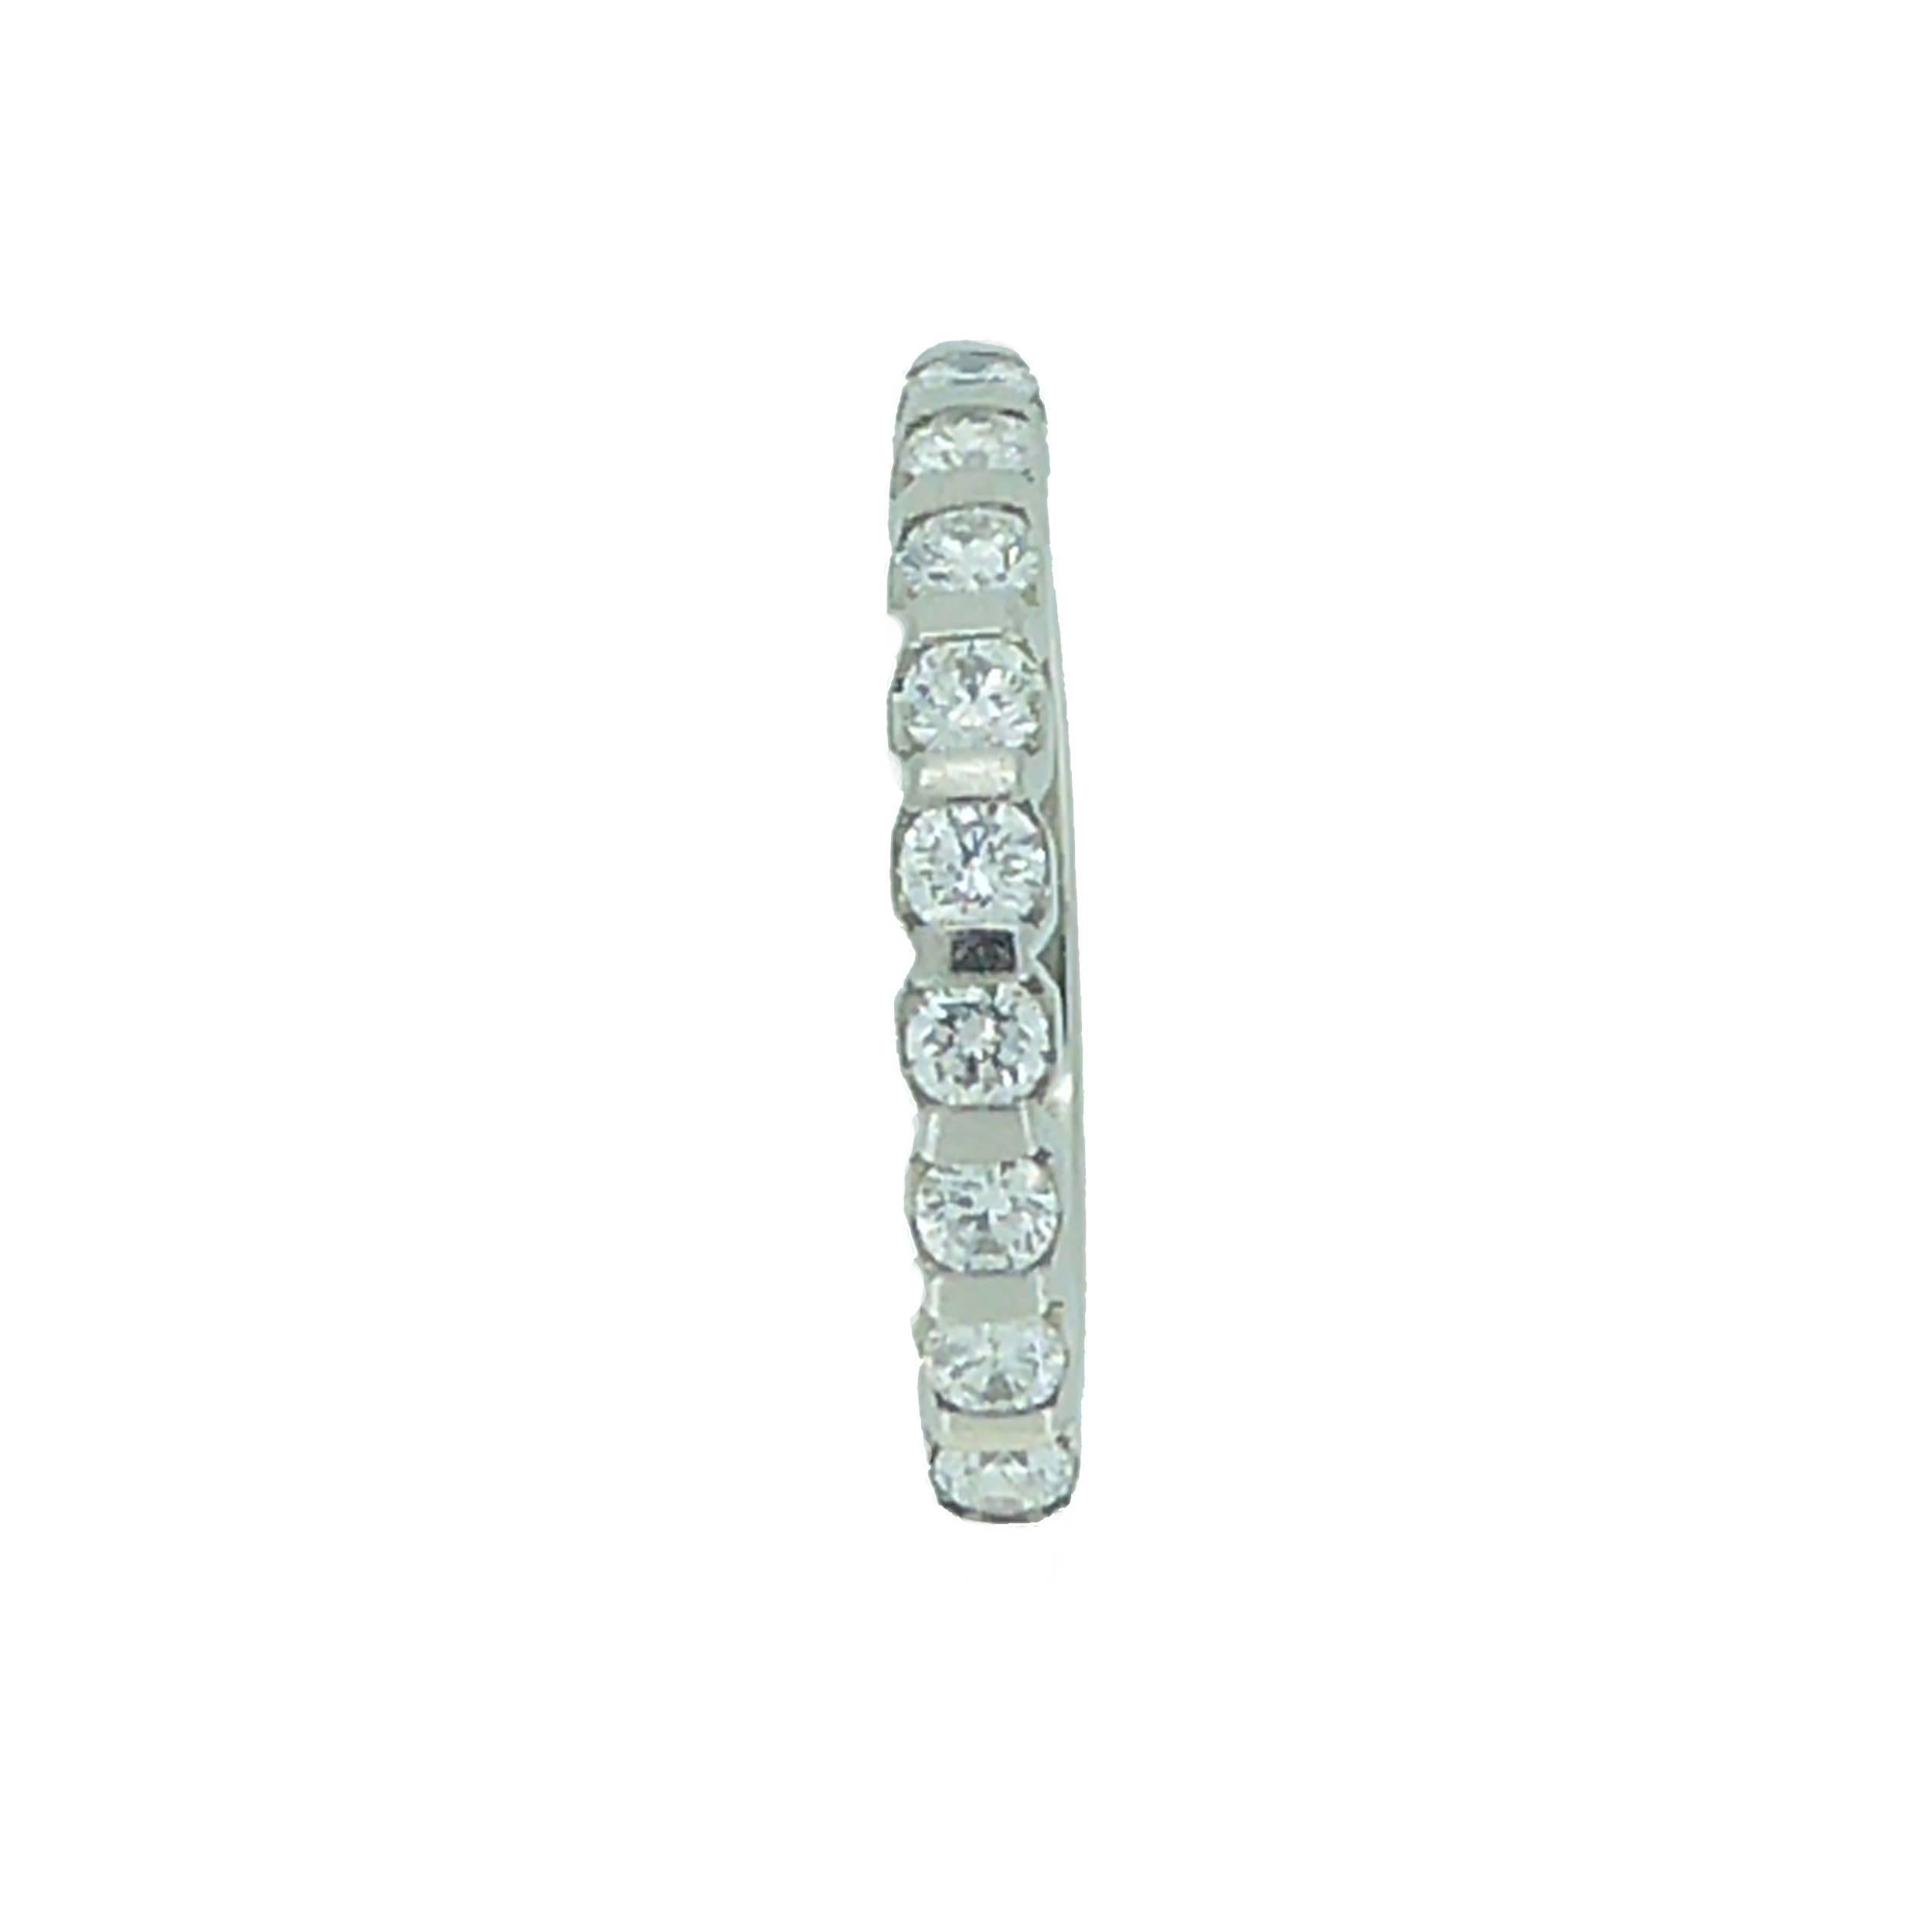 Fabulous as a wedding band or eternity ring, this ring is set with 9 diamonds on a smooth edged setting making it very comfortable to wear.  
The flat sides make a breeze to match to an engagement ring too, or even to create that contemporary